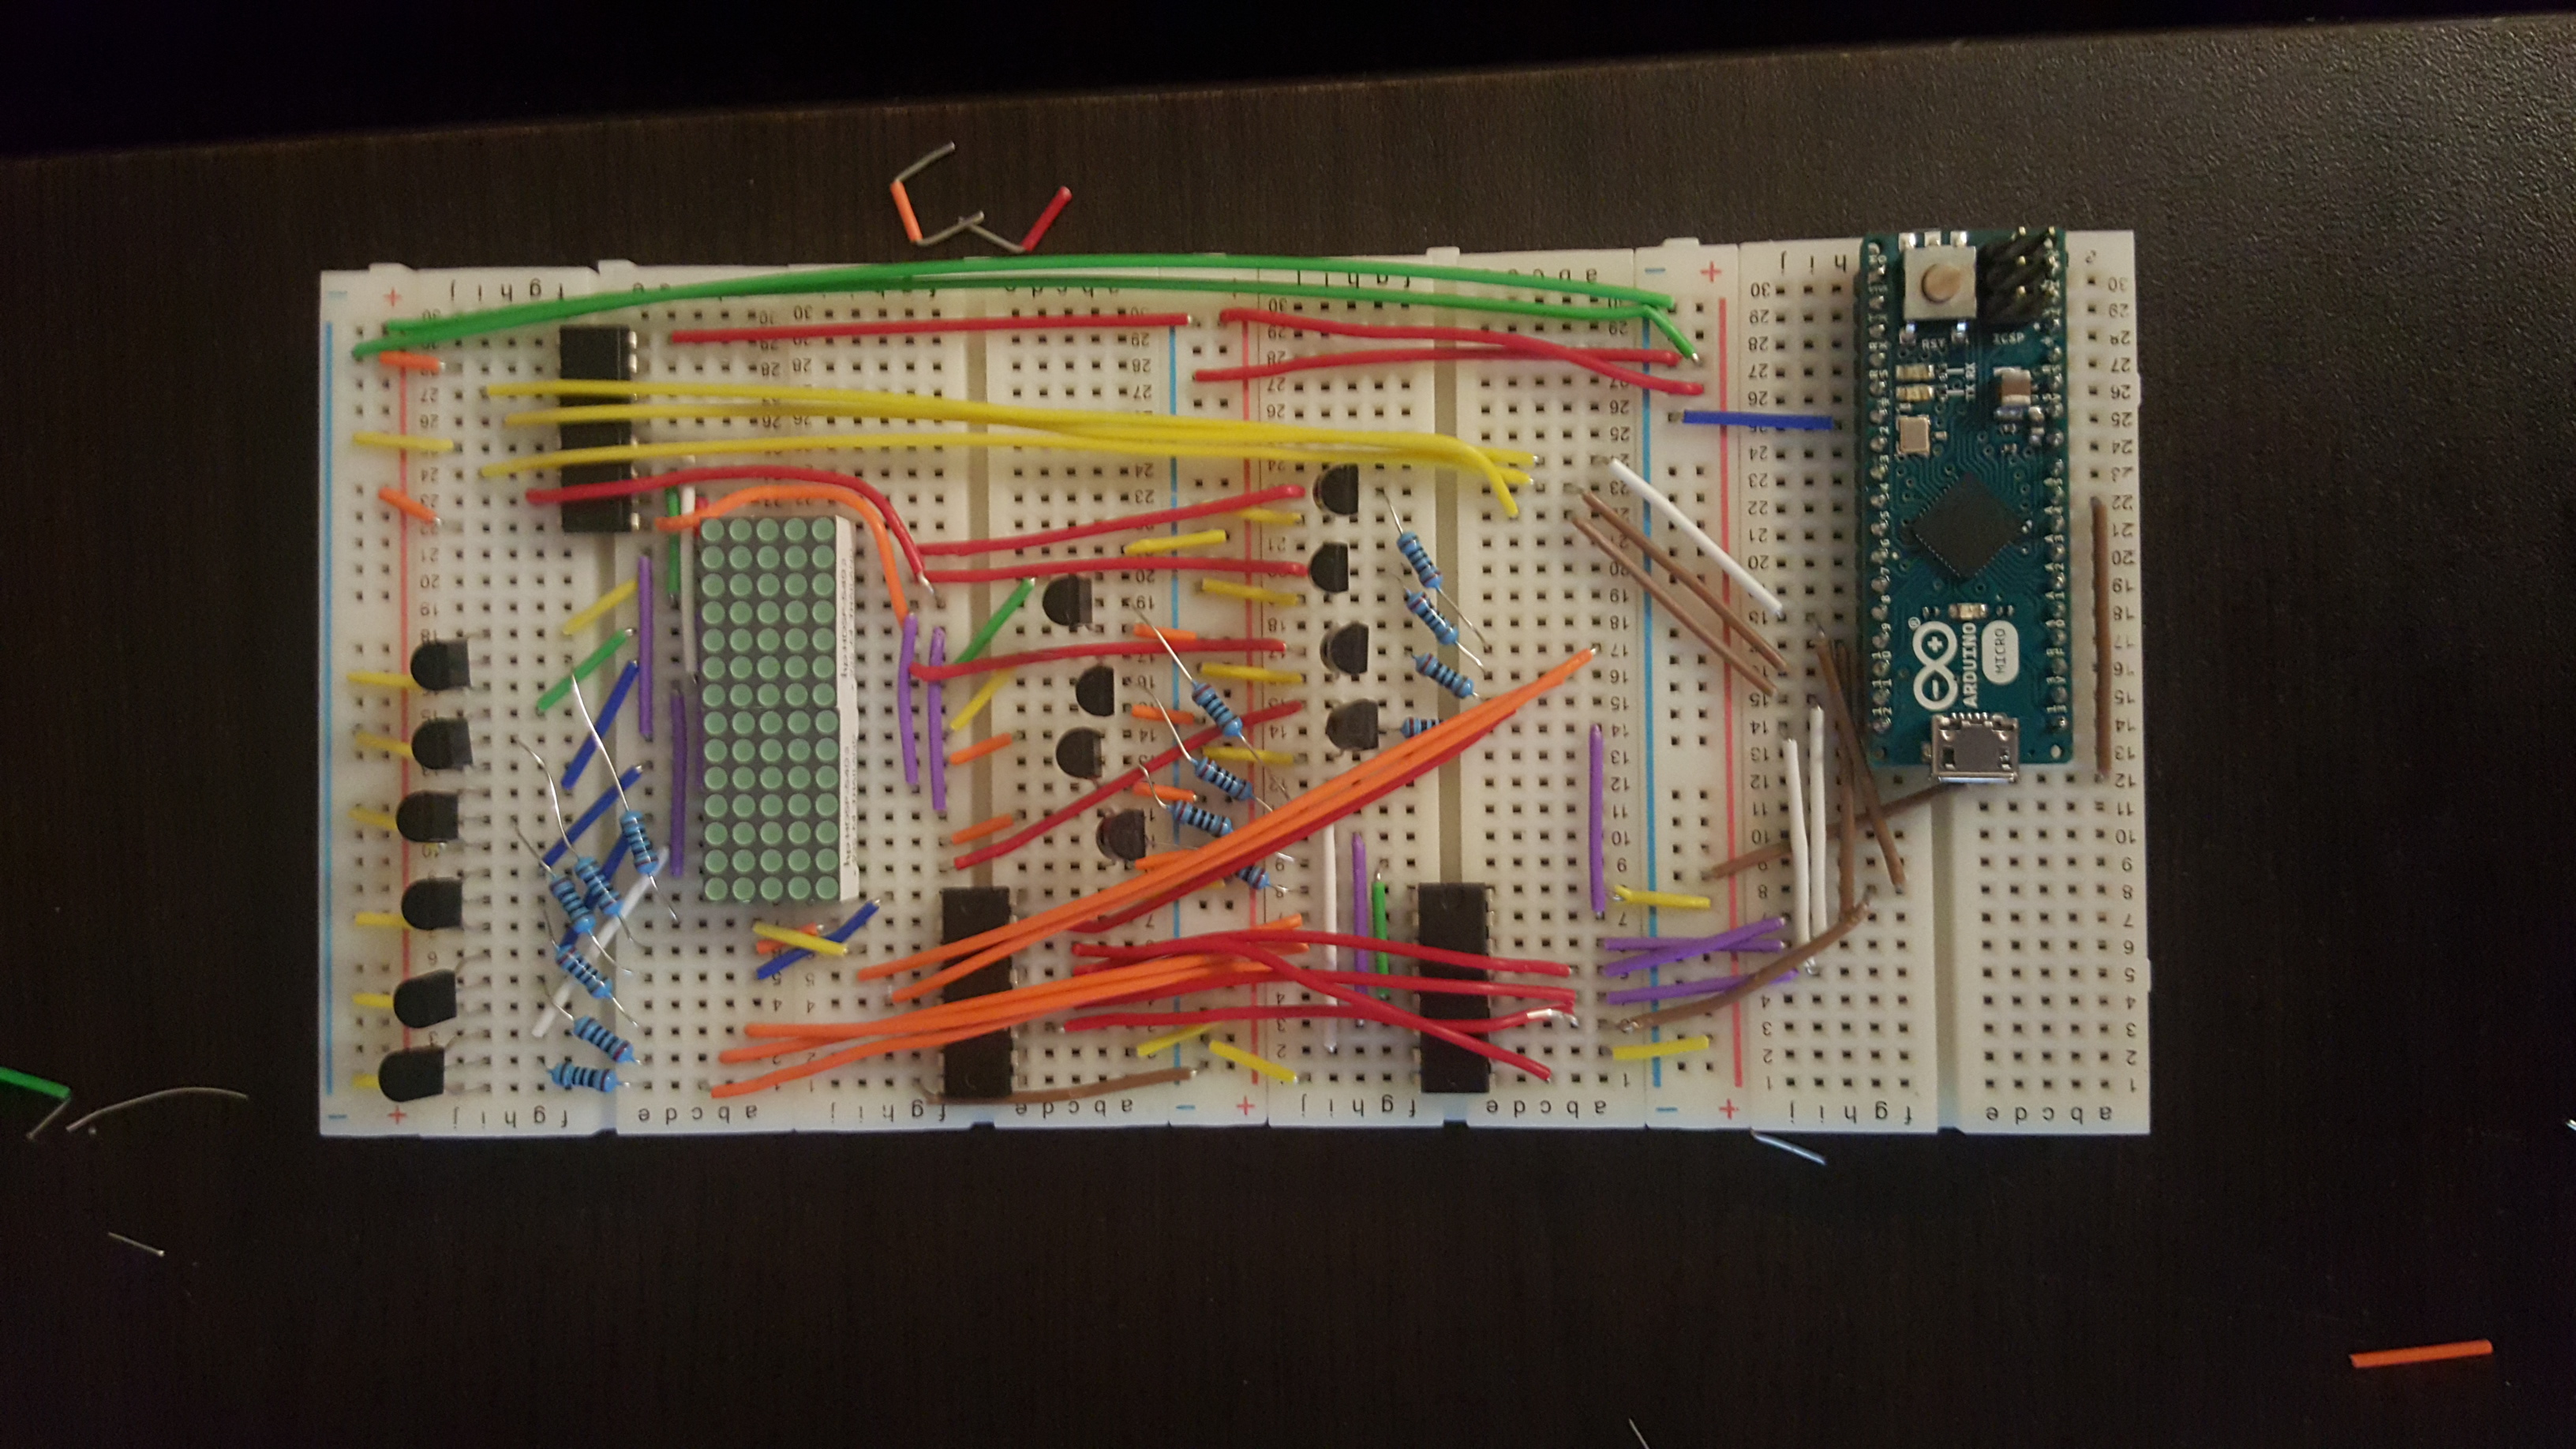 The top view of the actual Pong circuit wired into a bread board.